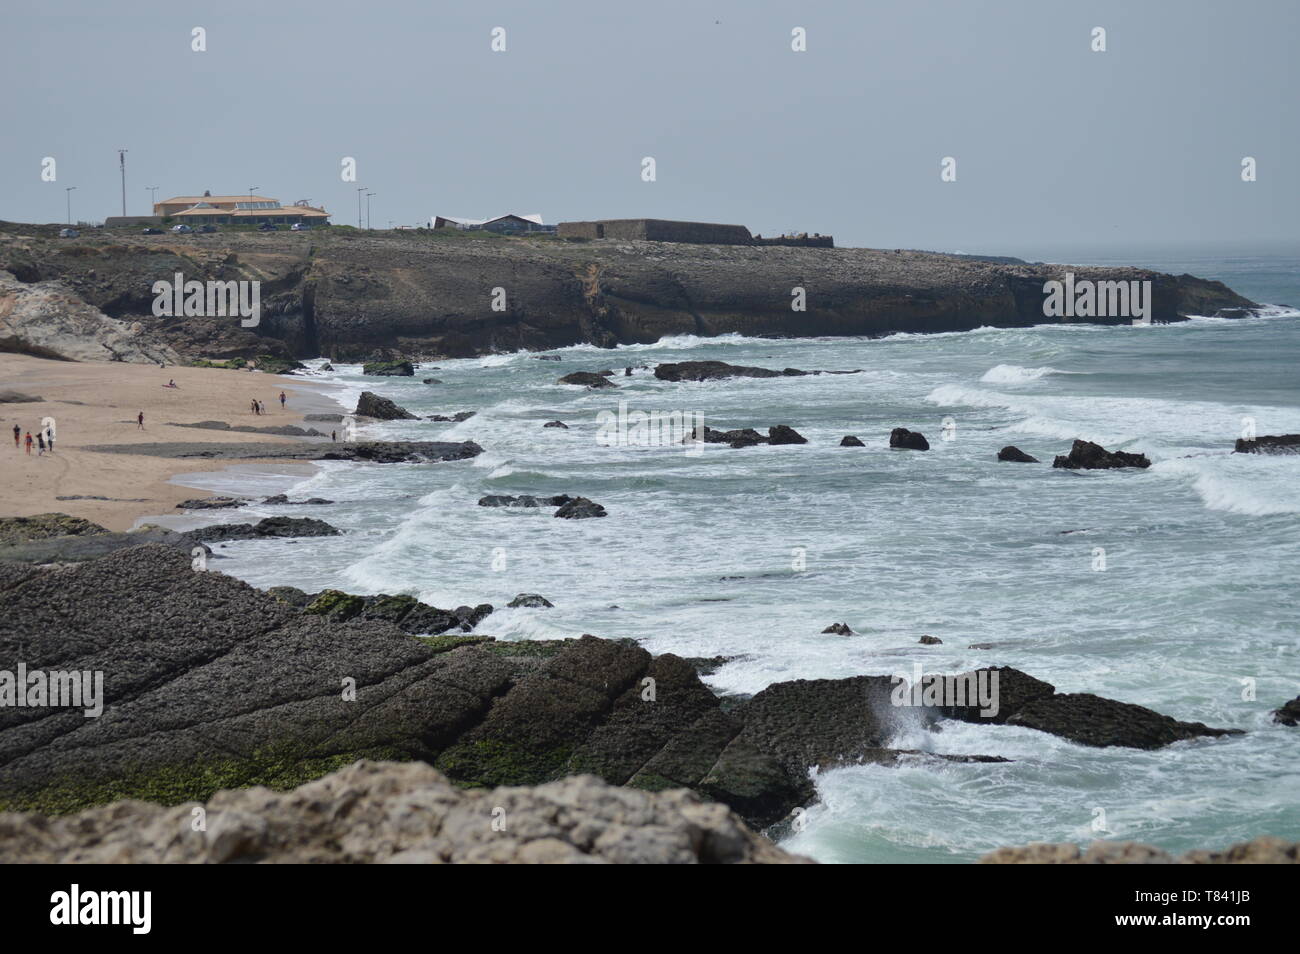 Beautiful Cresmina Beach With Fort Crismina On Top Right In Cascais. Photograph of Street, Nature, architecture, history, Geology. April 15, 2014. Cas Stock Photo